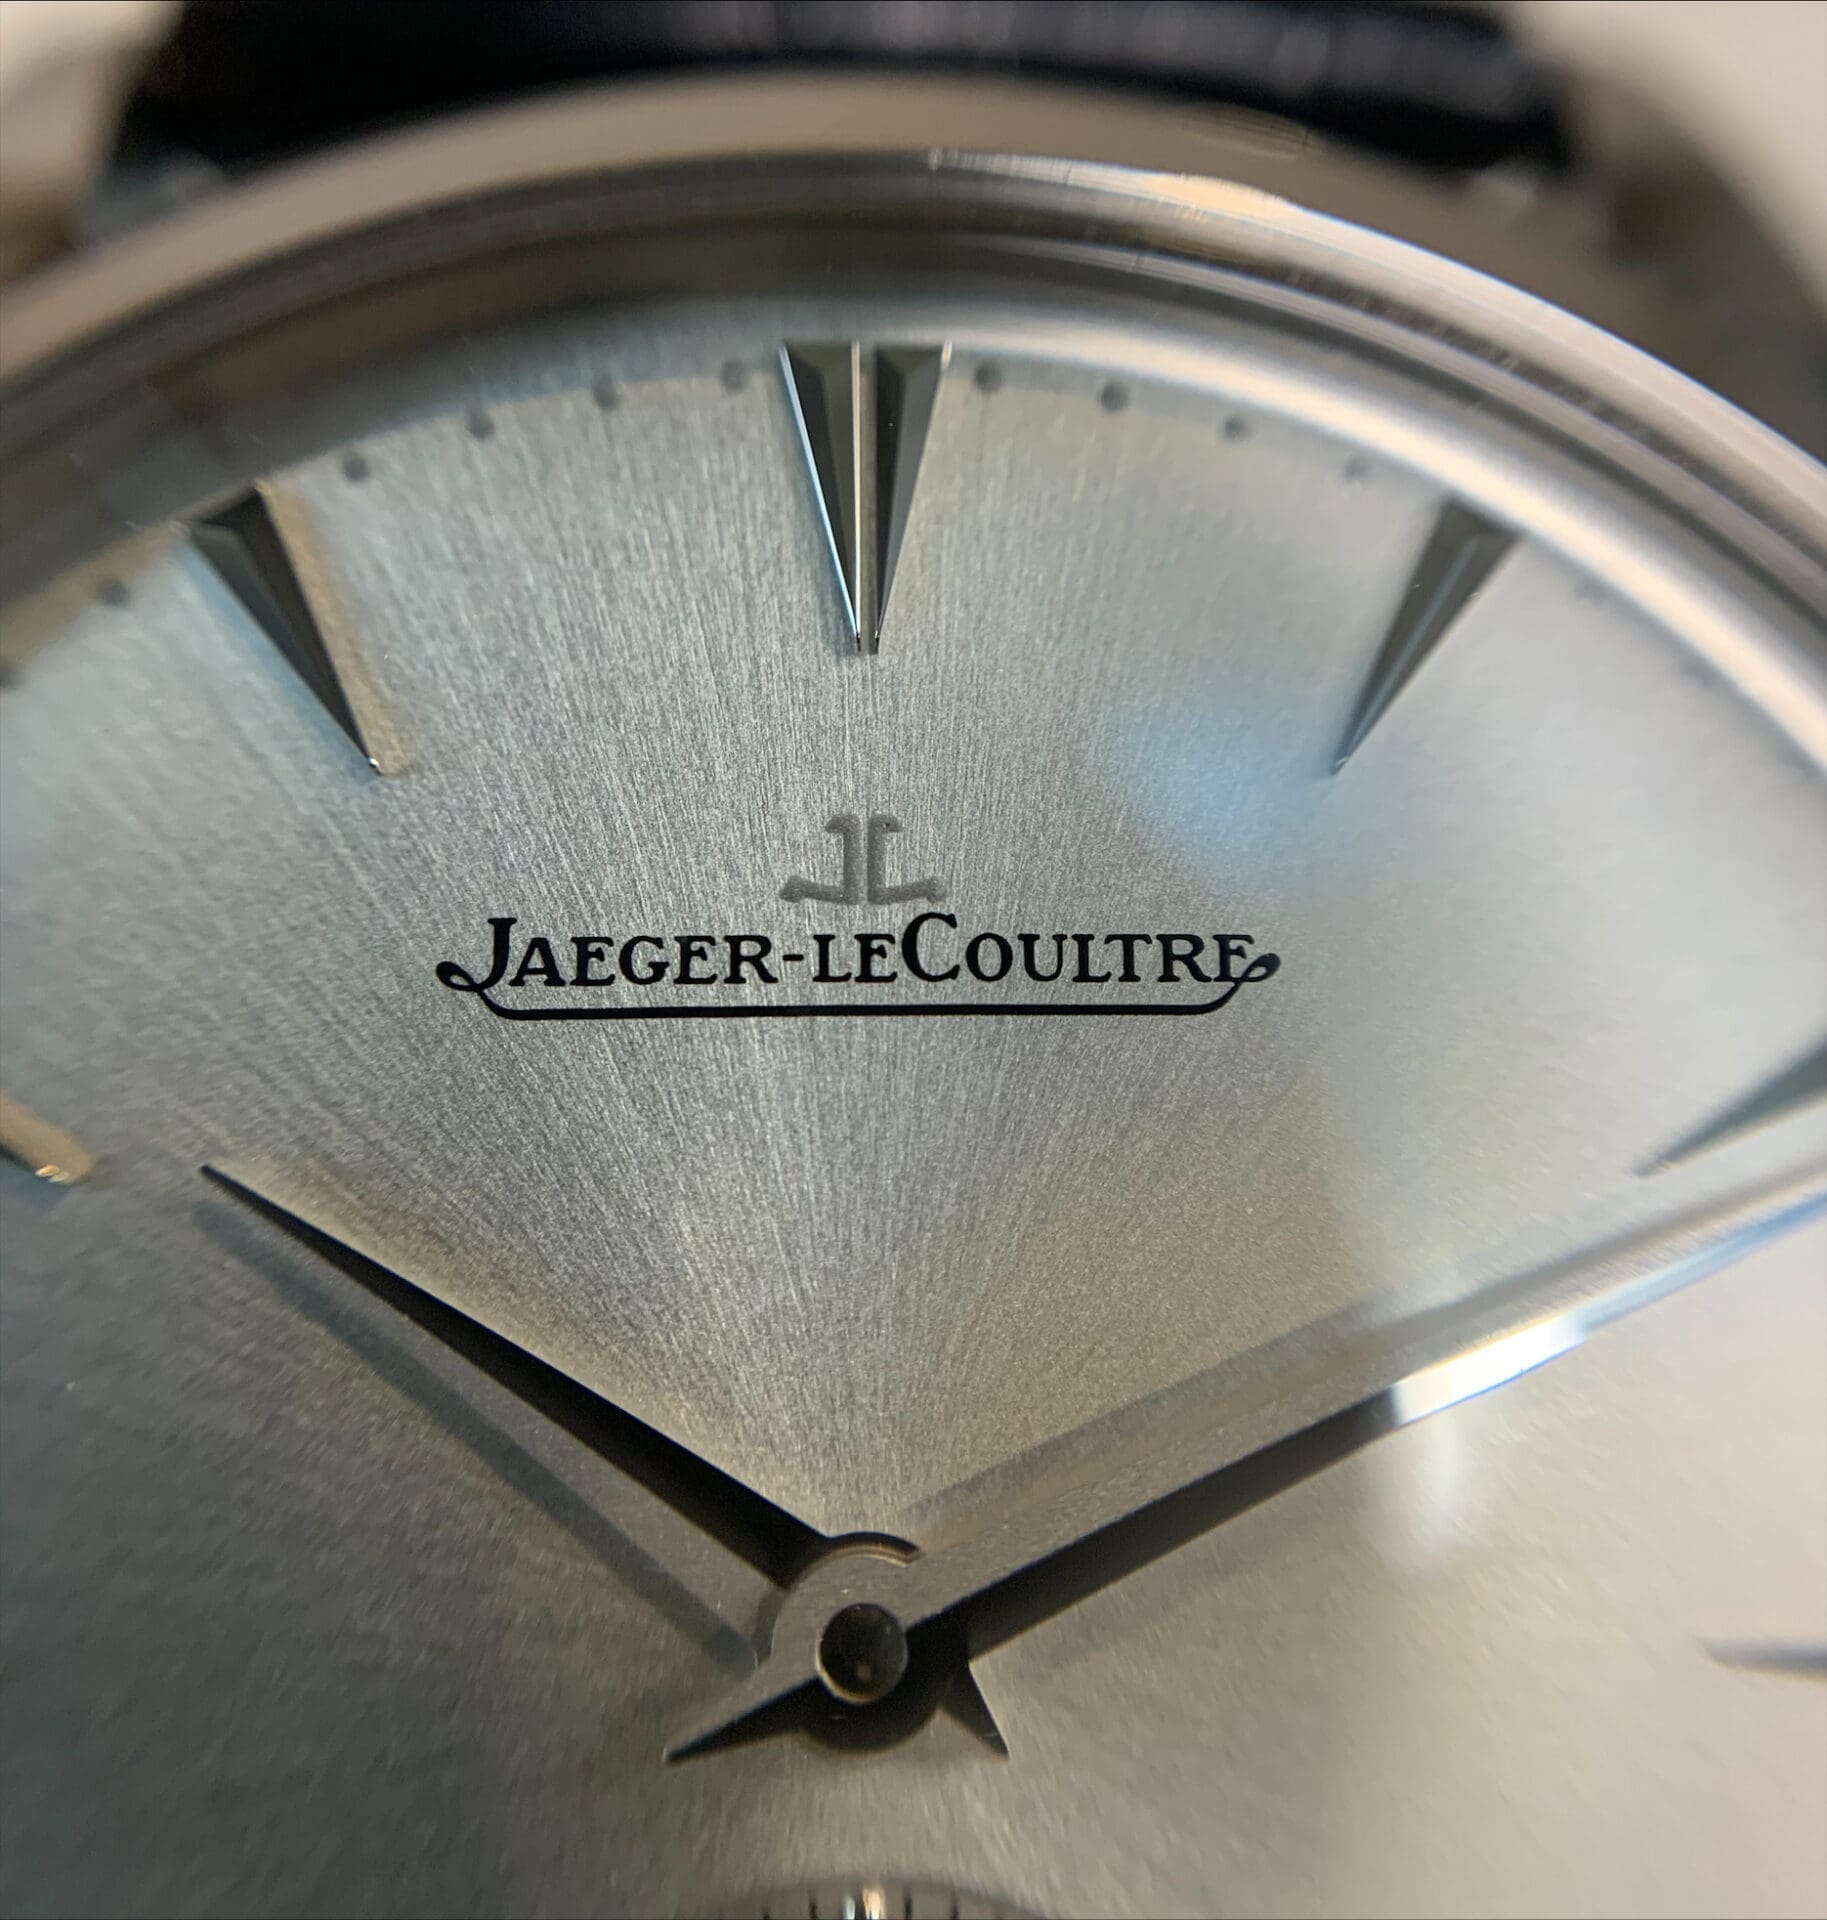 my first Jaeger-LeCoultre